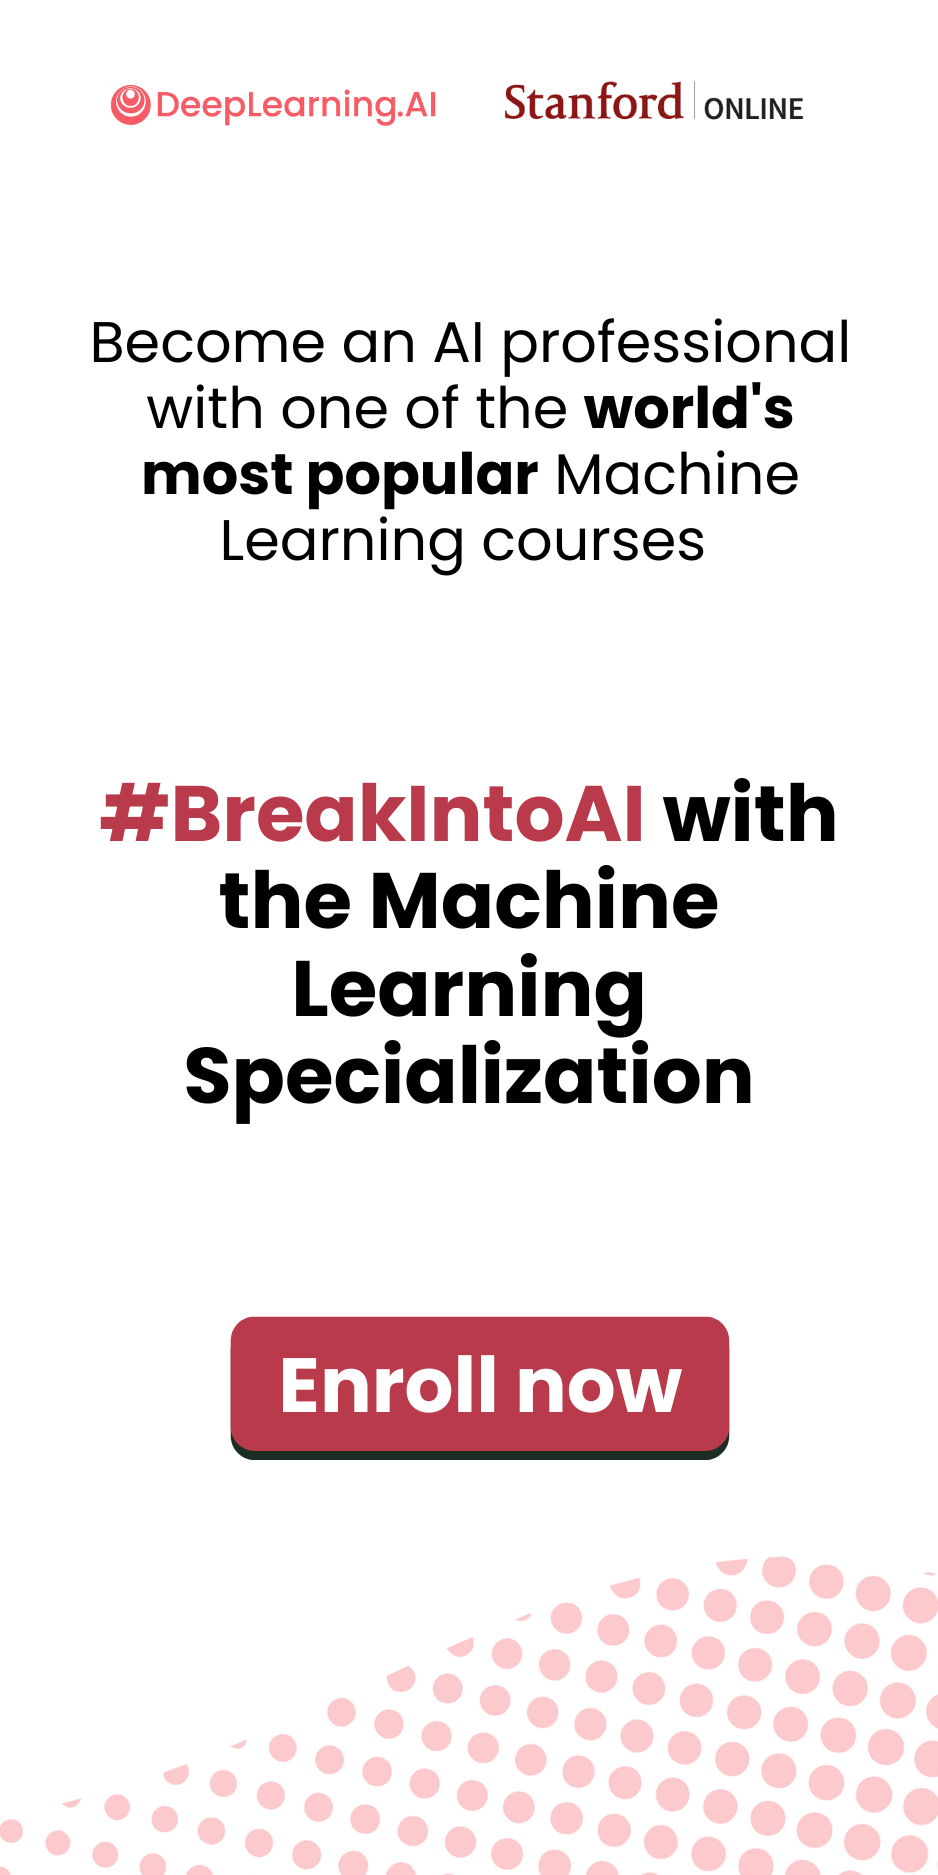 Become an AI professional with one of the world's most popular Machine Learning courses. #BreakIntoAI with Machine Learning Specialization